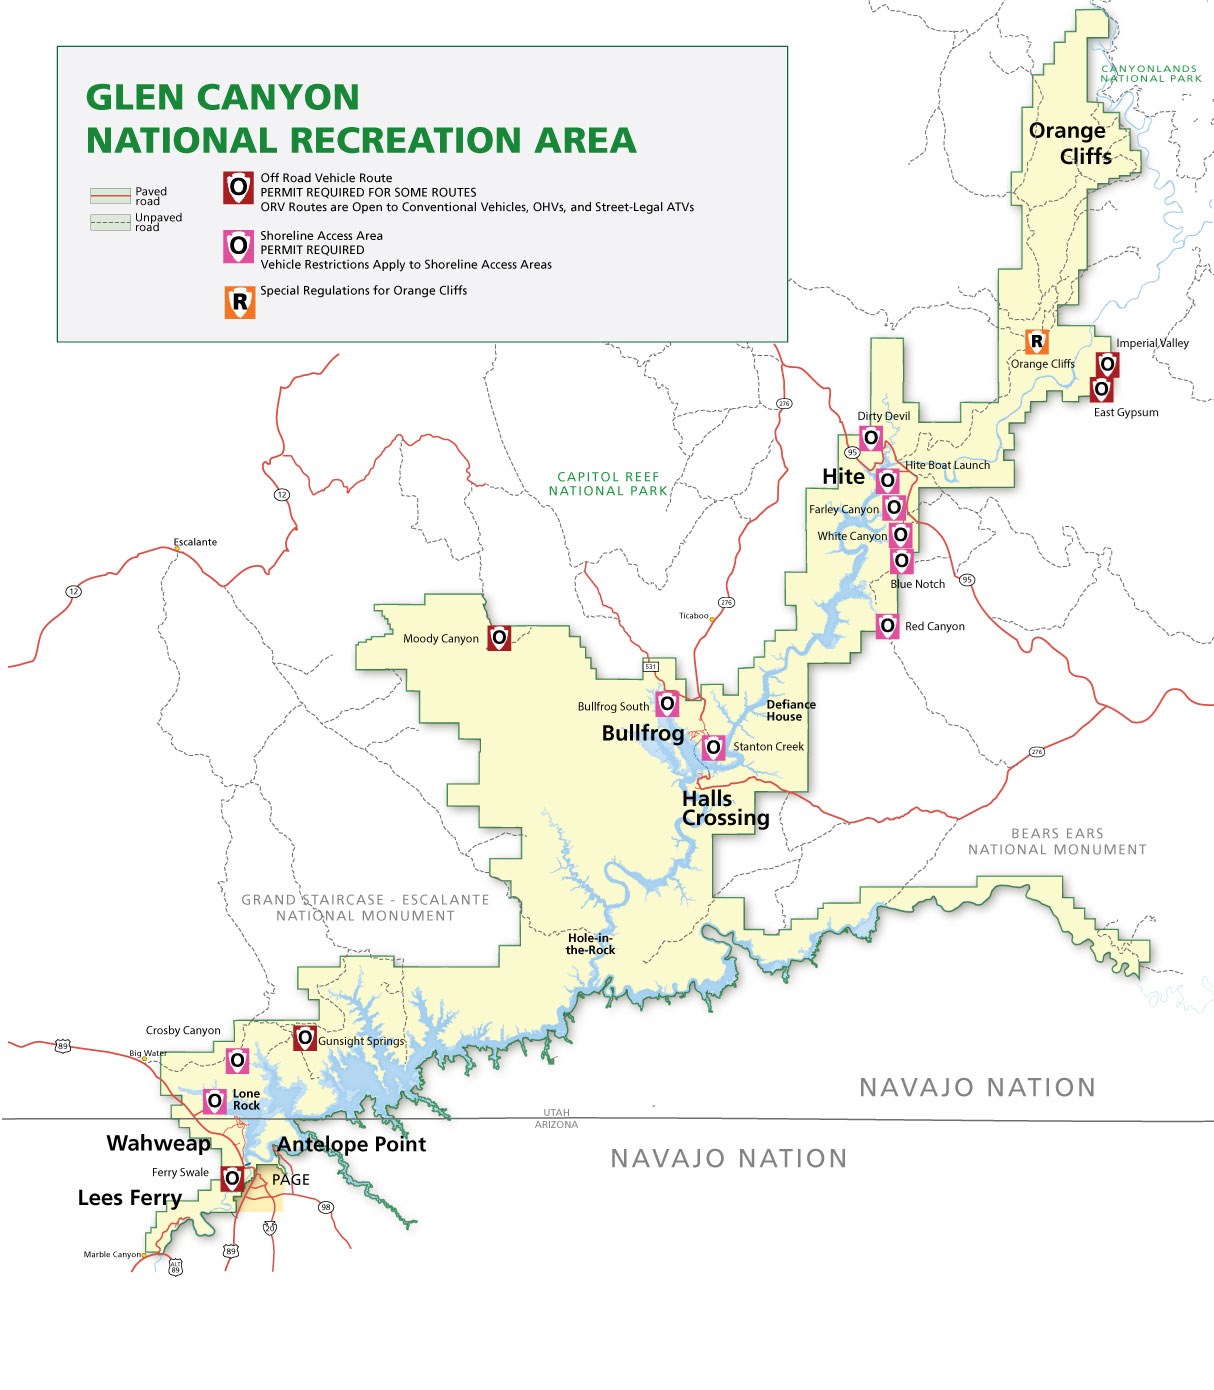 A map of Glen Canyon National Recreation area with 16 red arrowhead icons that can be selected to view ORV maps.